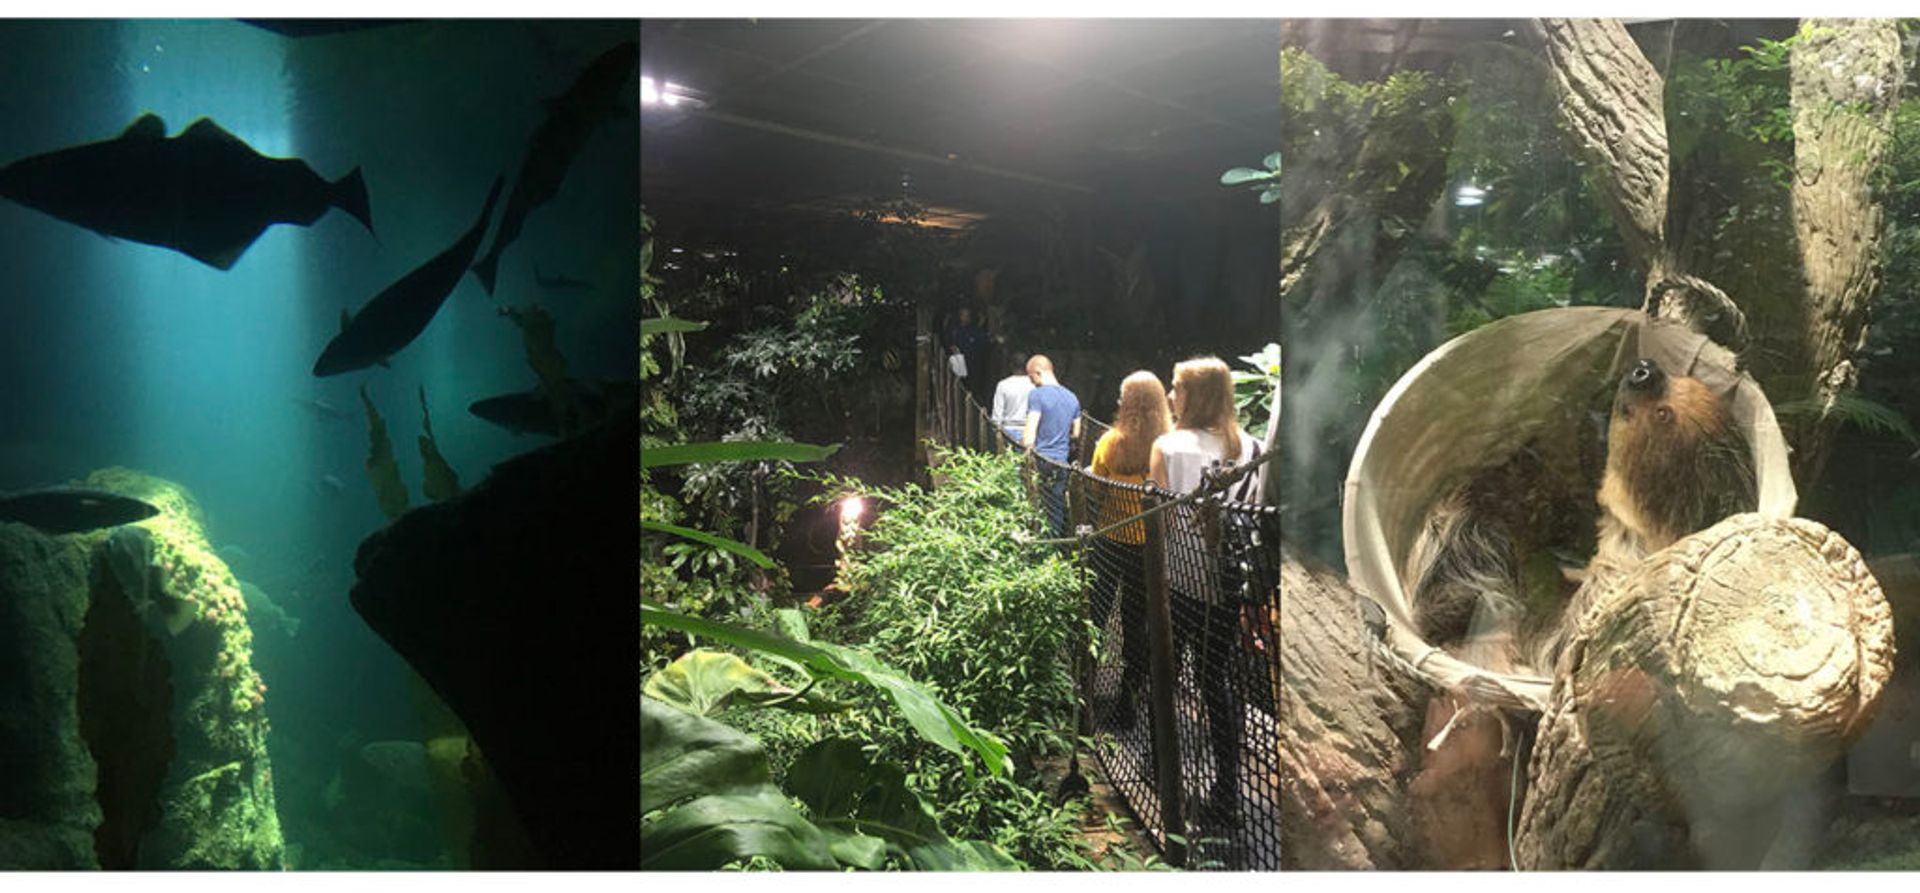 Fish in an aquarium, people walking across a bridge in Universeum's jungle section and a sloth wakes up